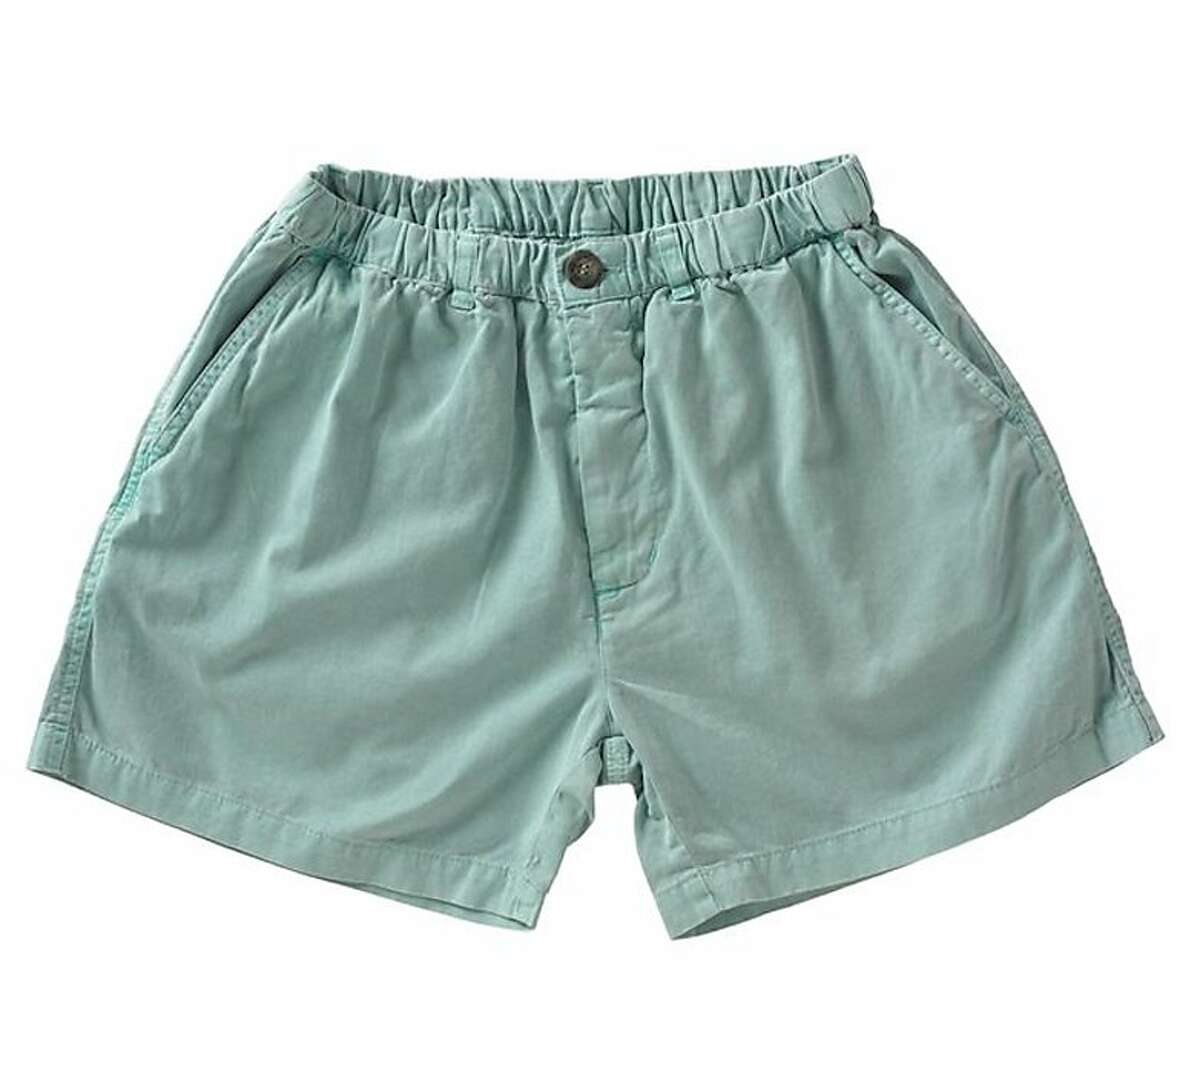 Chubbies Shorts Popular With Troops 1449